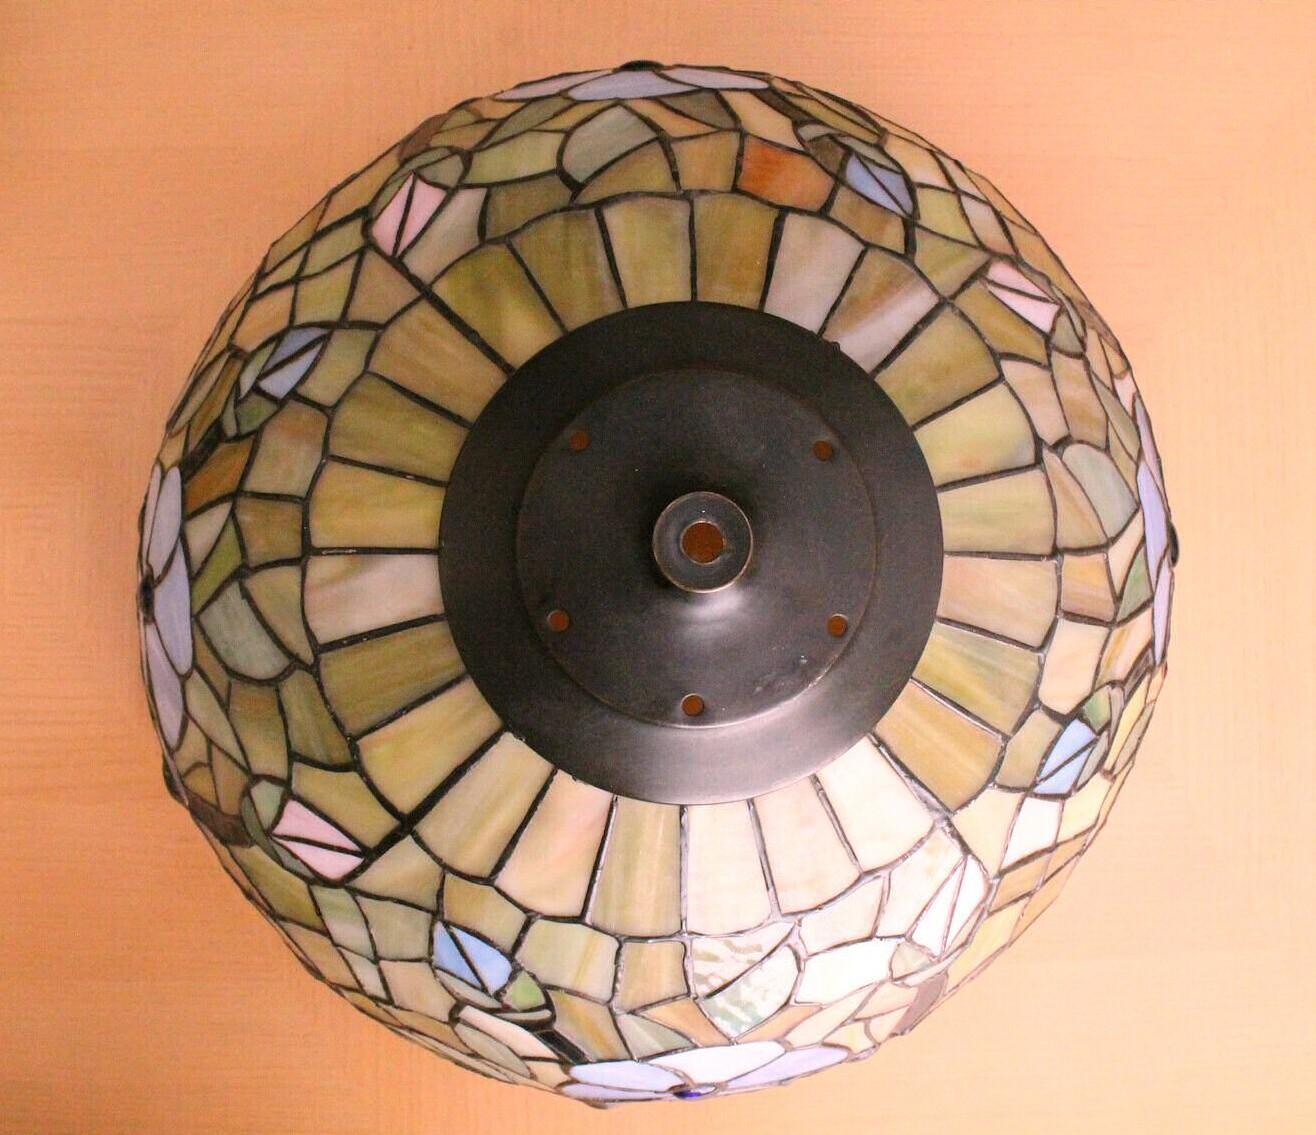 Magificent 1920s Art Nouveau Metal Sculptural Lotus Lamp. Camed Art Glass In Good Condition For Sale In Peoria, AZ